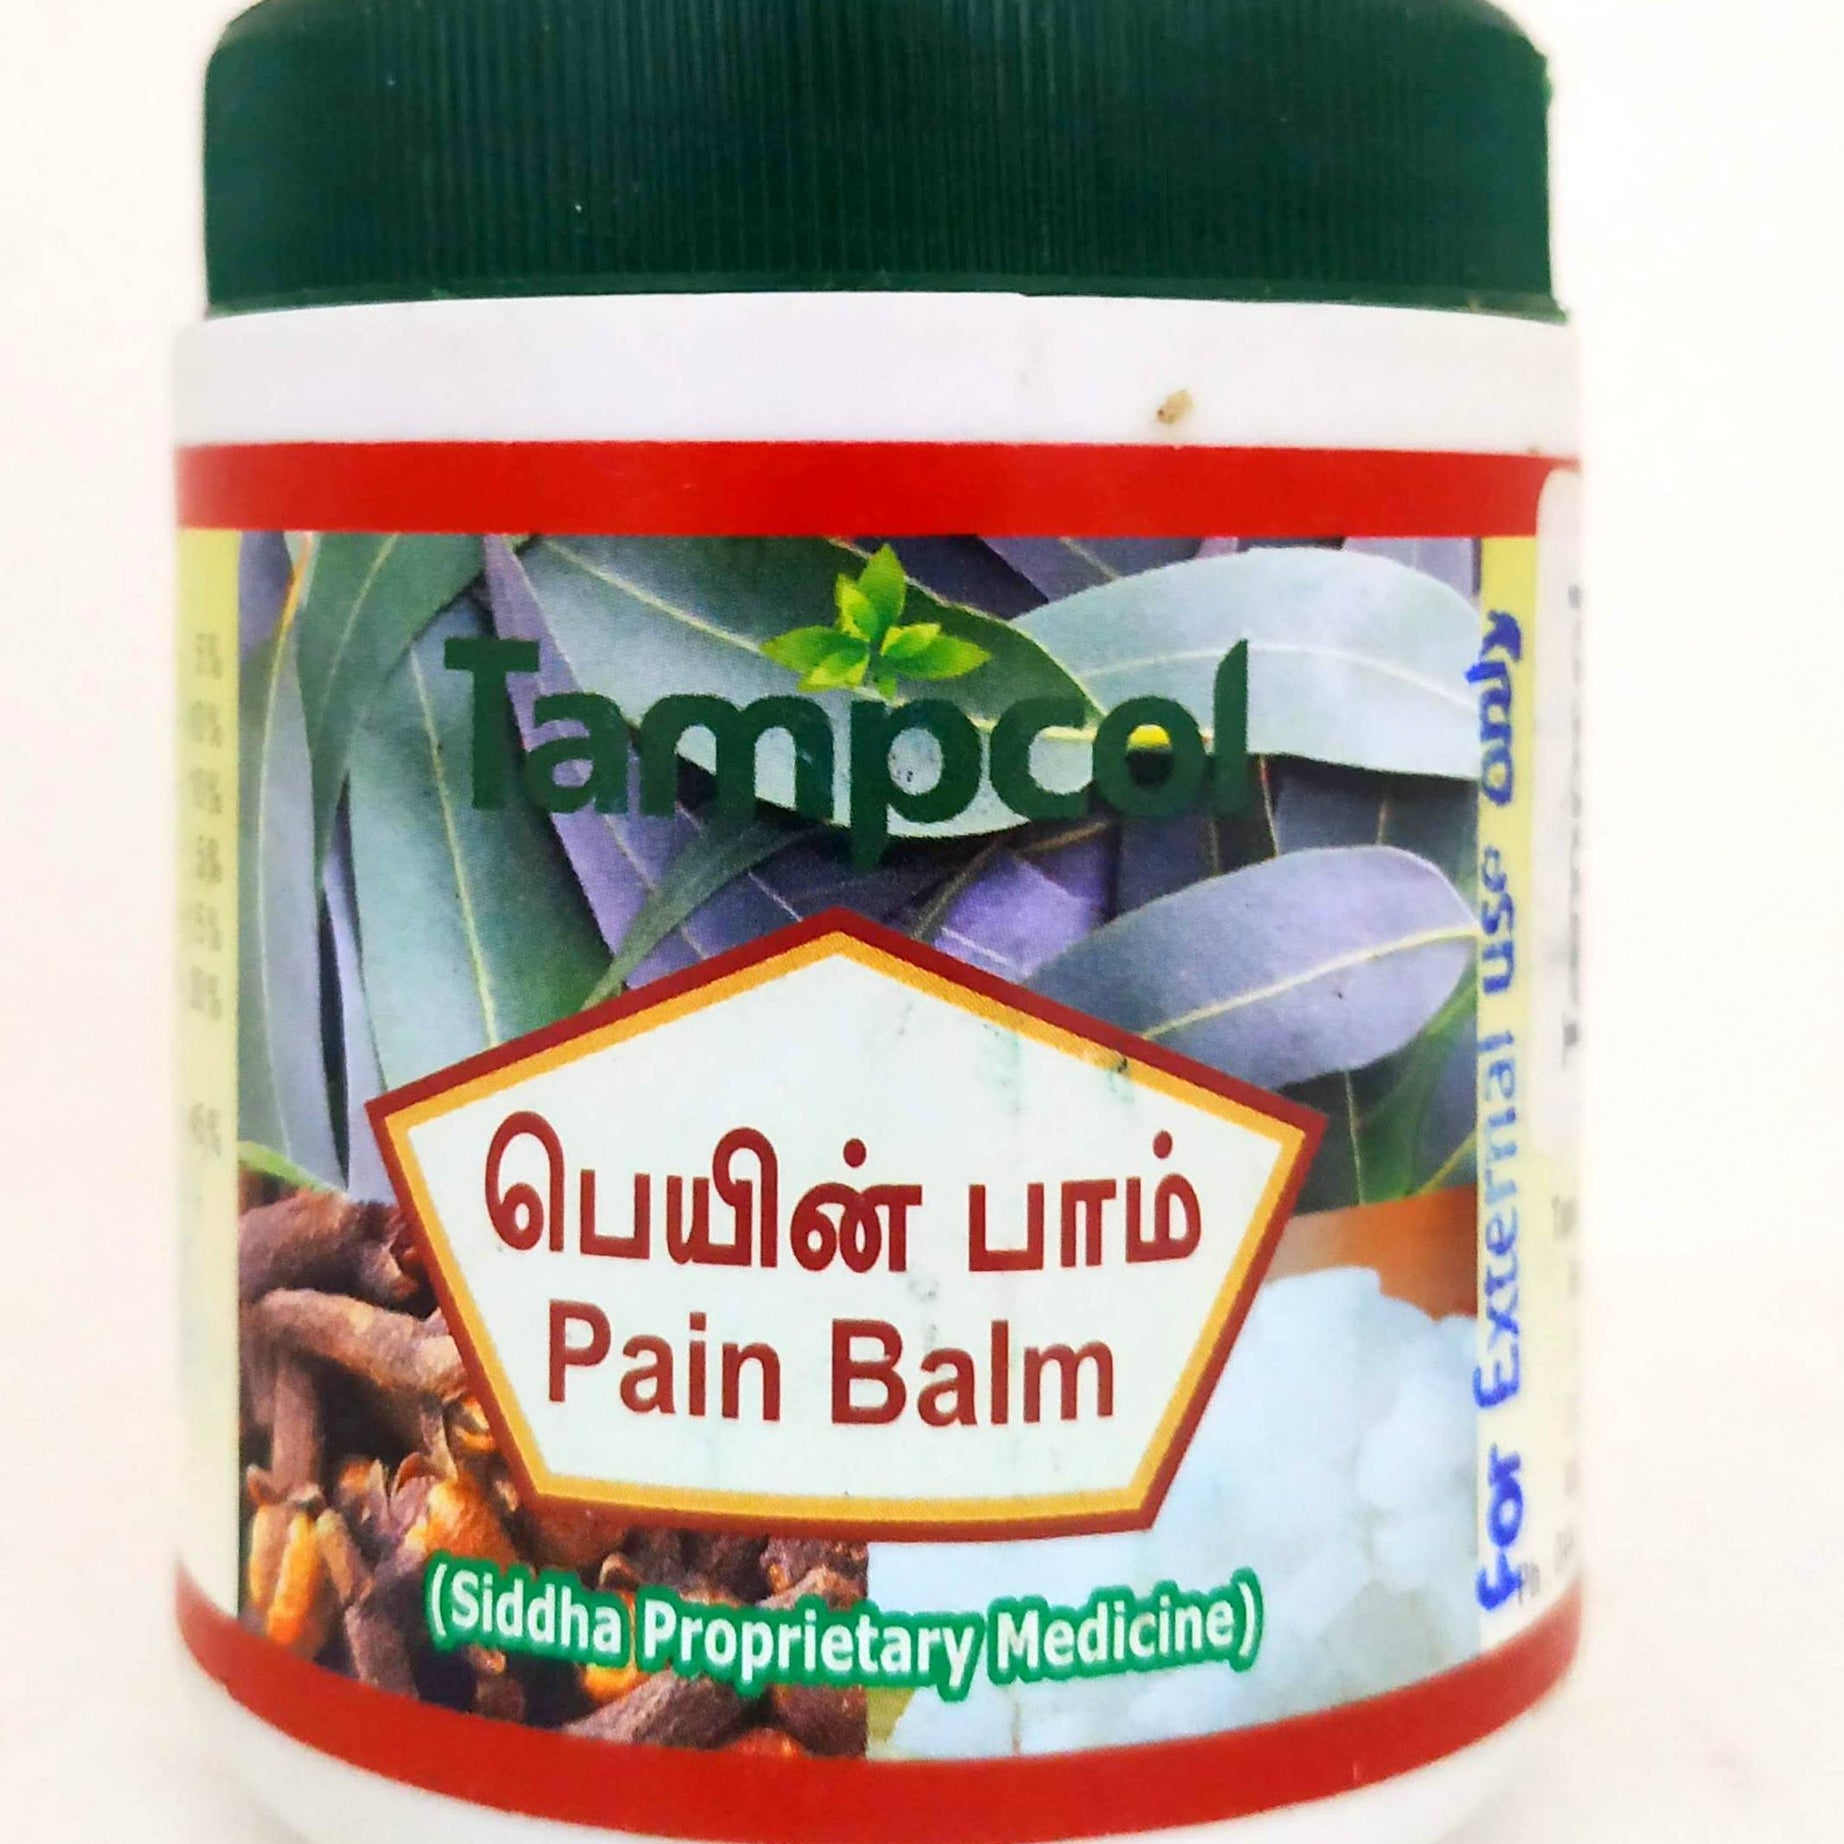 Shop Tampcol Pain Balm 100gm at price 209.50 from Tampcol Online - Ayush Care